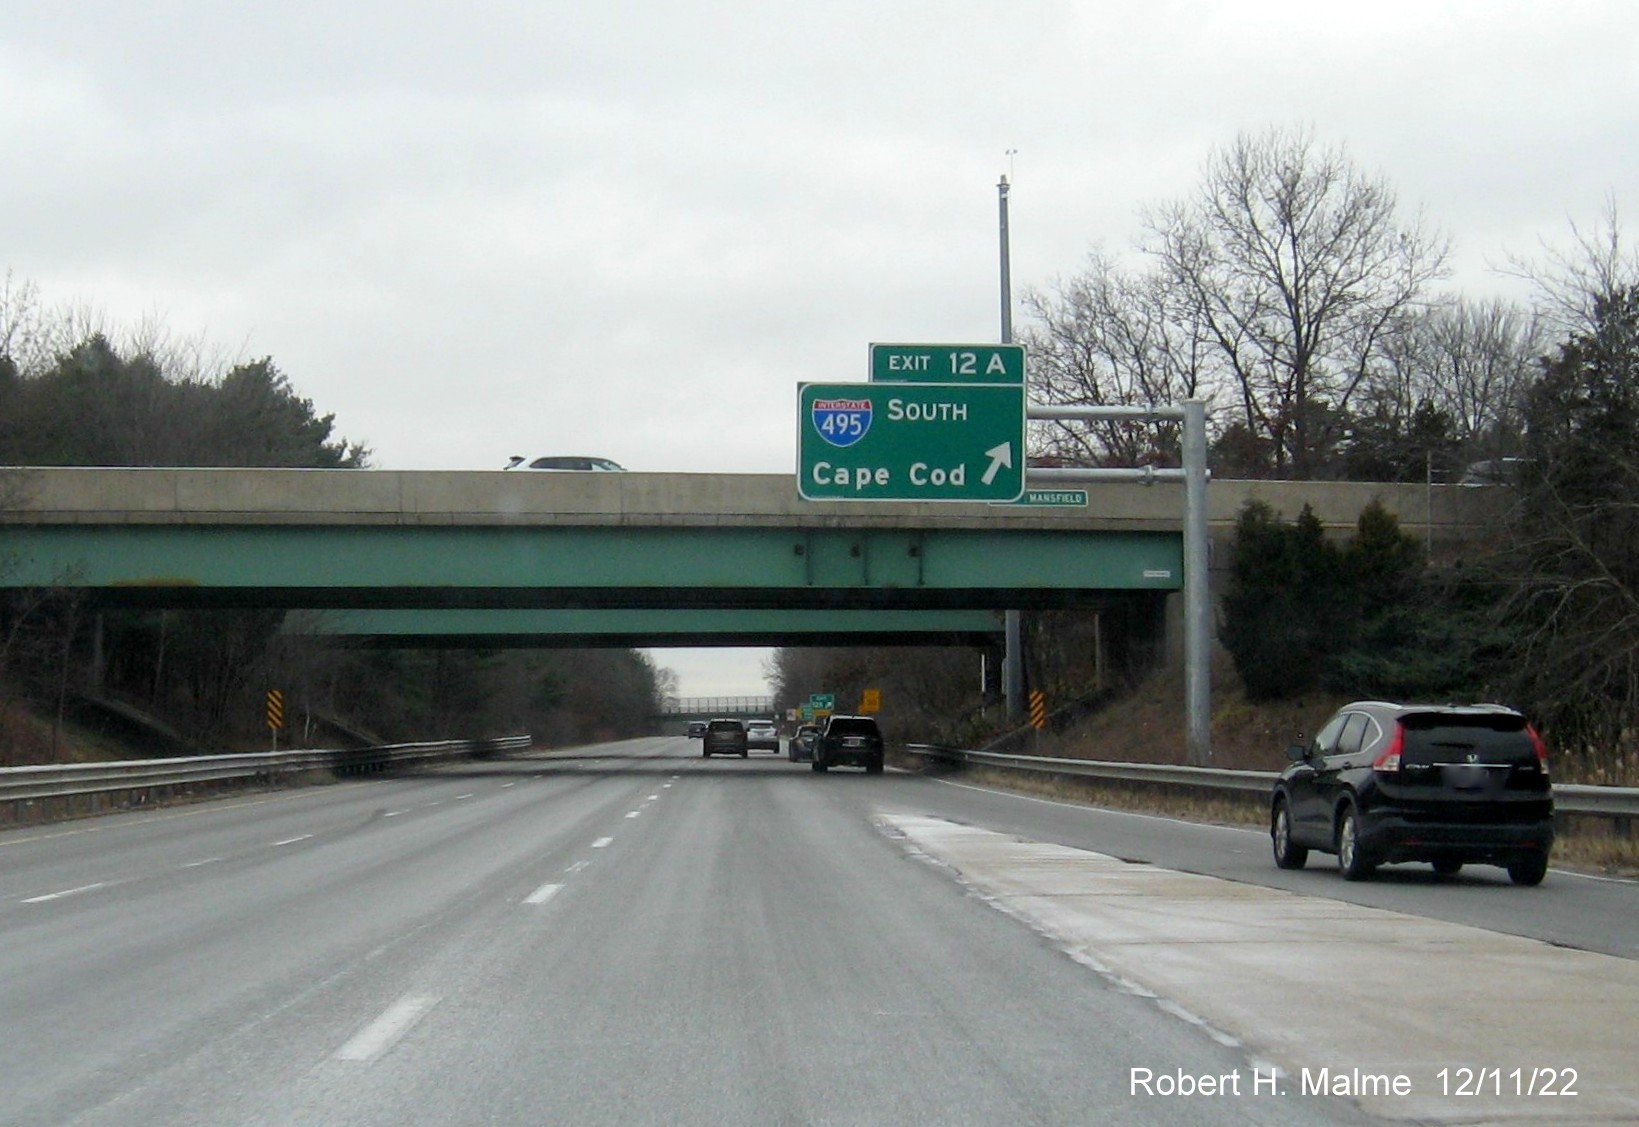 Image of newly placed overhead ramp sign for I-495 South exit on I-95 South in Foxboro, August 2022